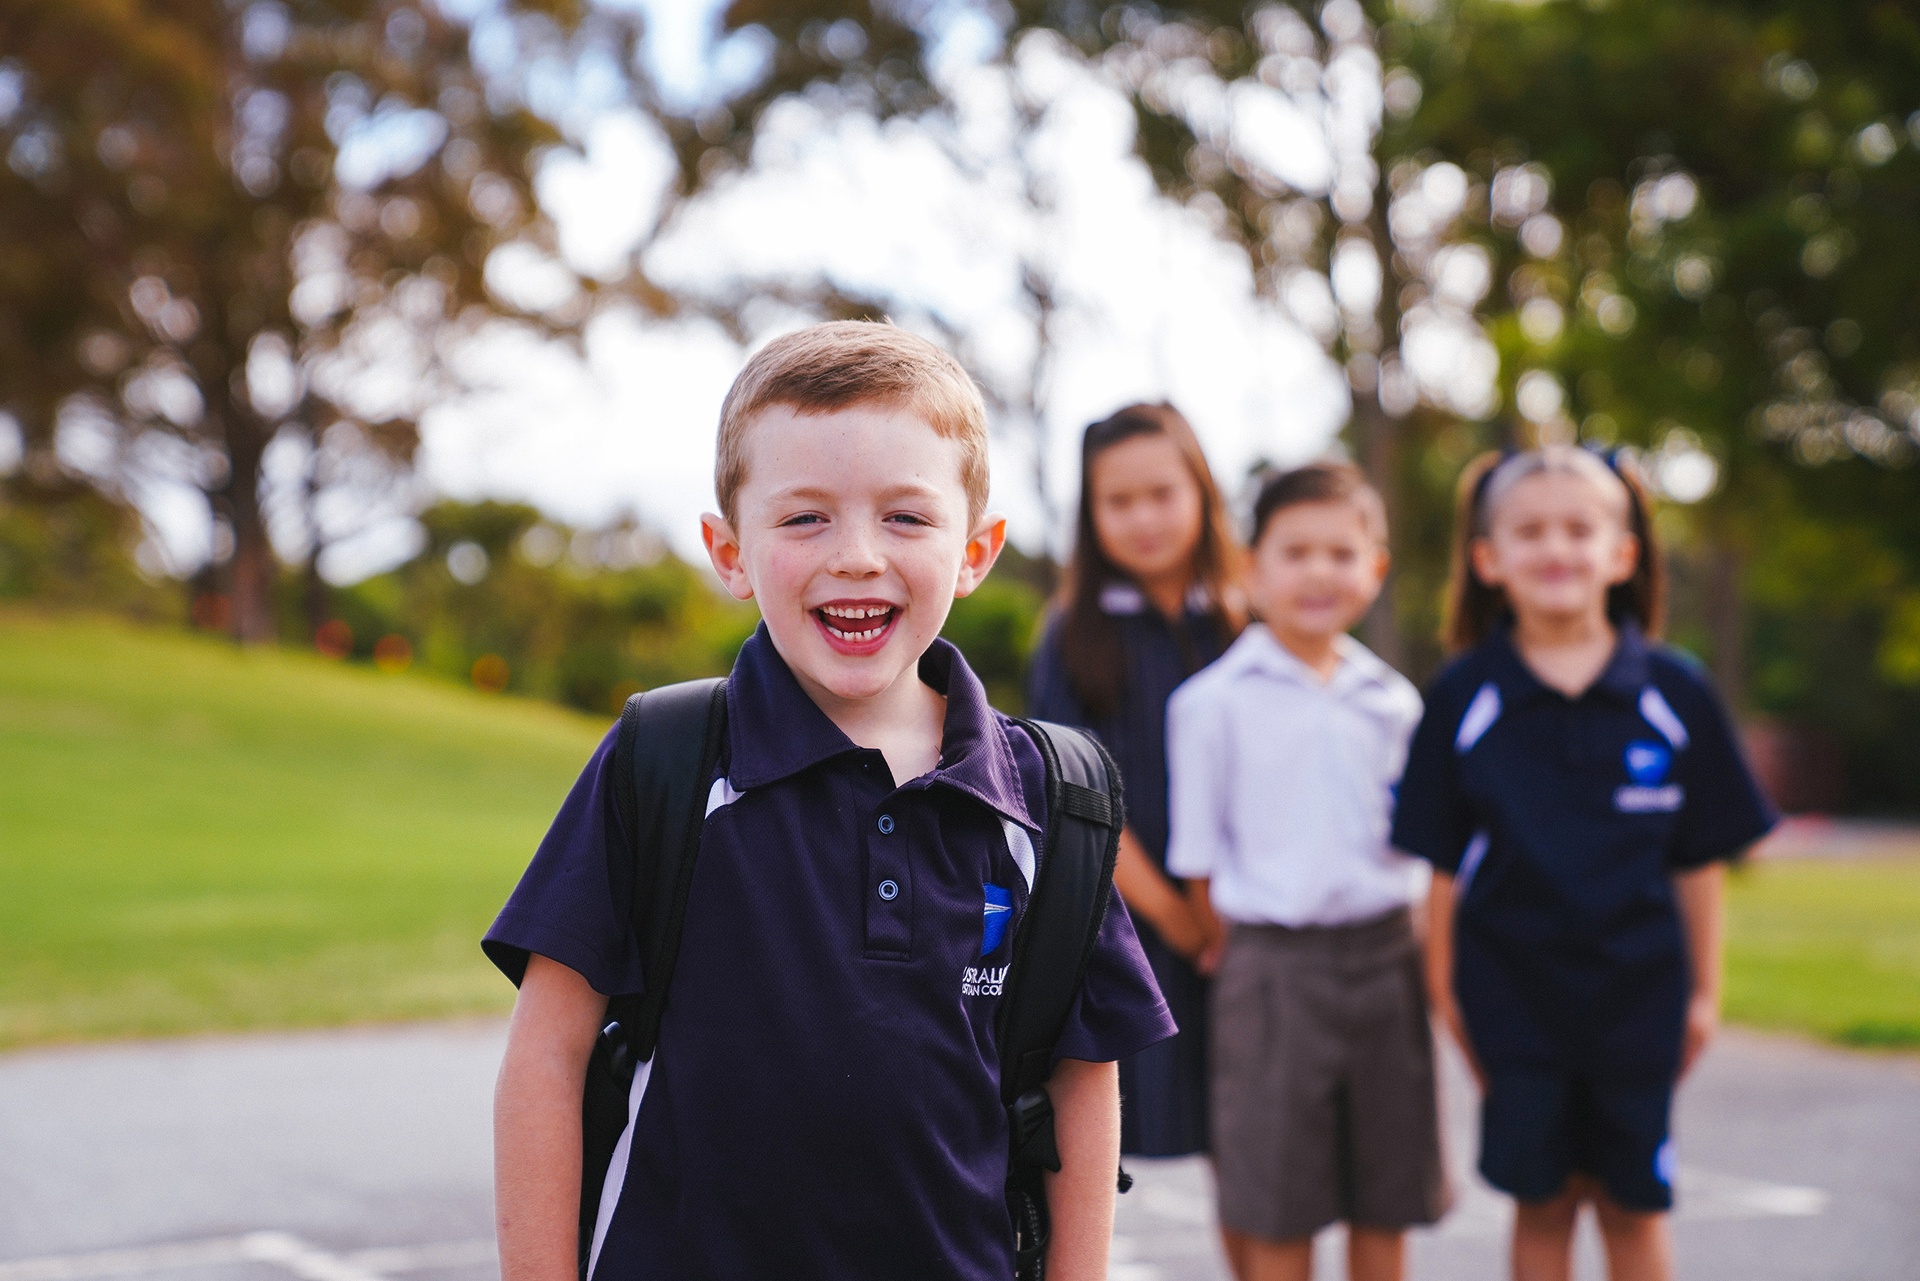 ACC Hume primary boy wearing sports uniform and backpack on school oval